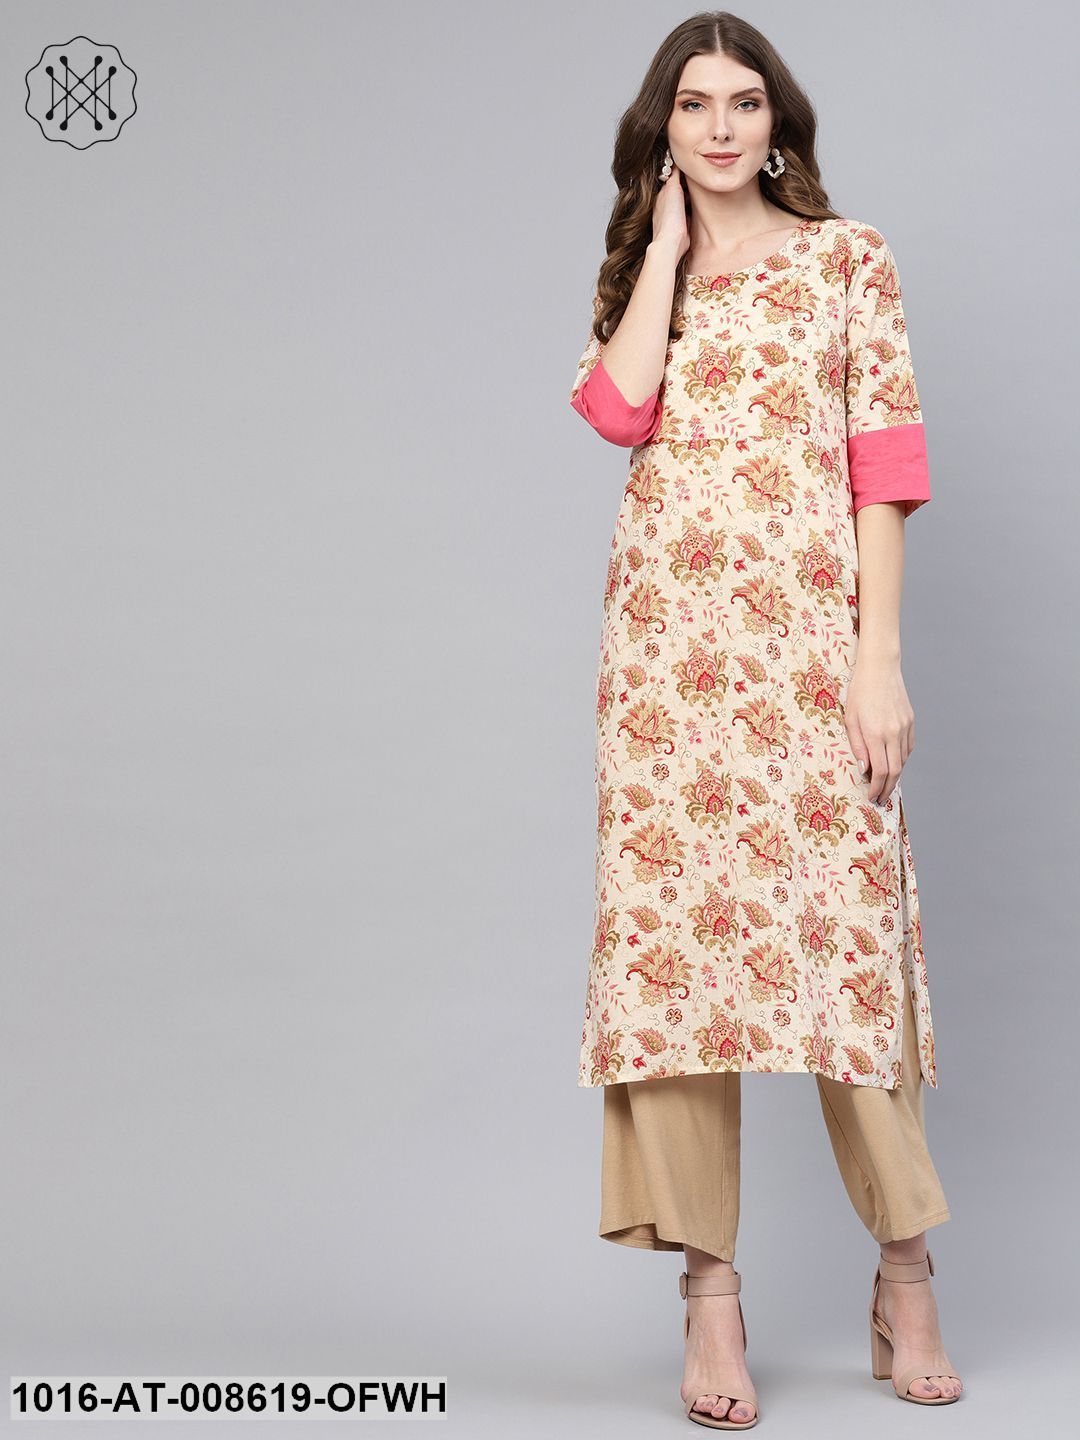 Off -White & Pink Floral Printed Straight Kurta With Round Neck & 3/4 Sleeves With Solid Cuff